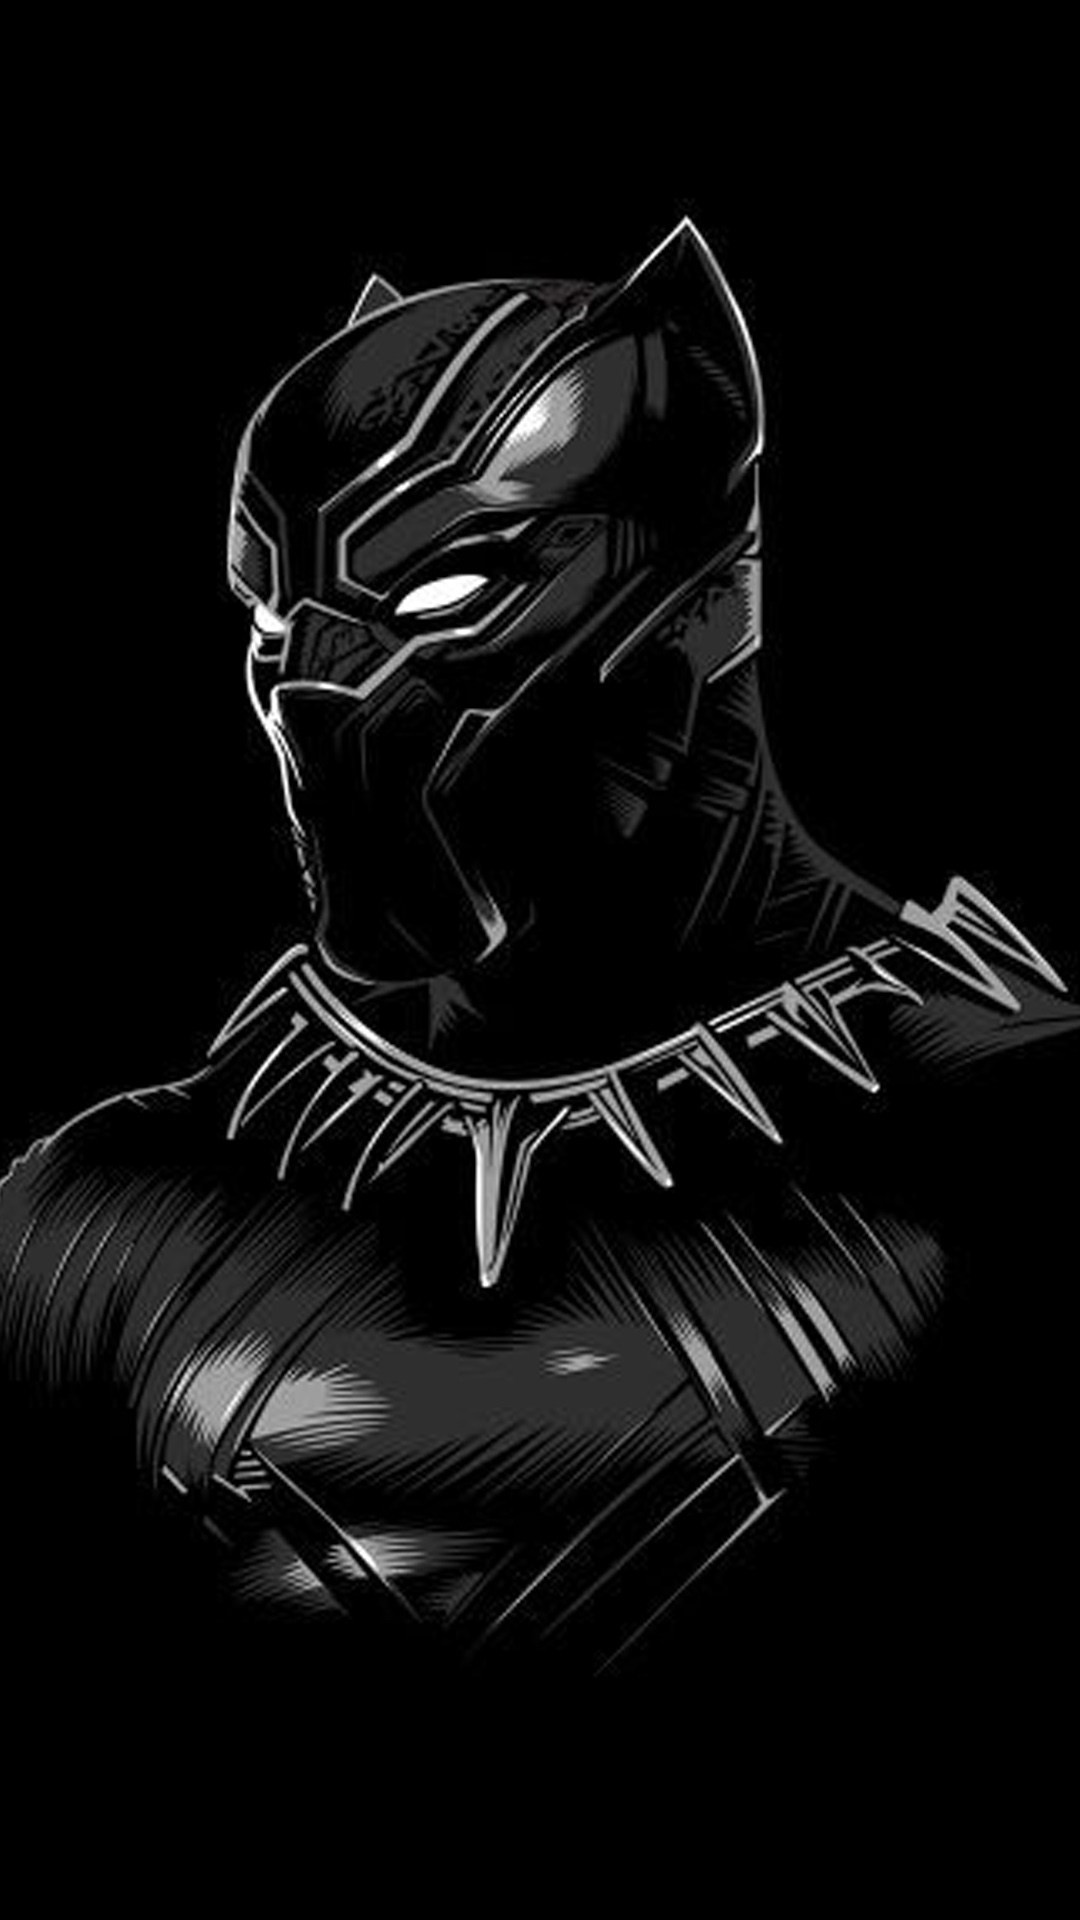 1080x1920 Images Of Black Panther Wallpapers Free Sc